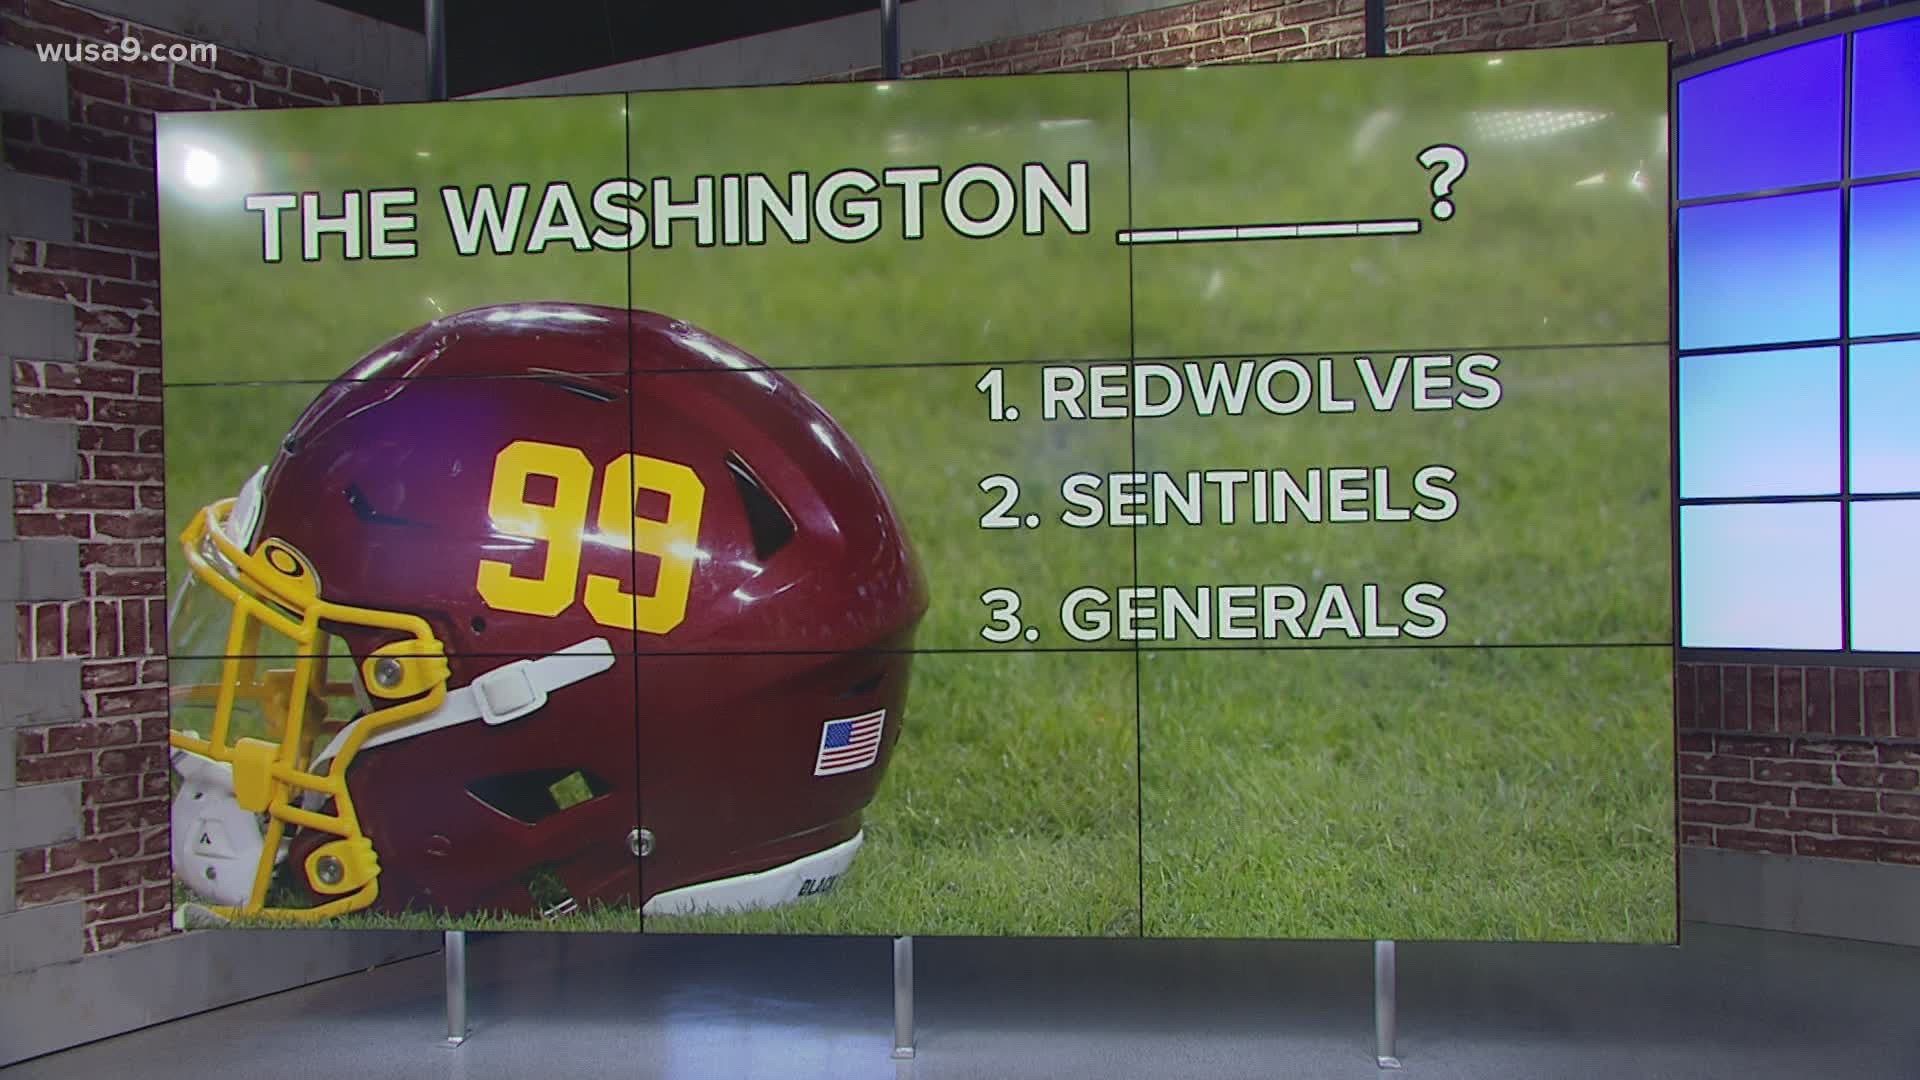 Washington Football Team will be moving forward with no ties to Native American imagery, Team President Jason Wright says.